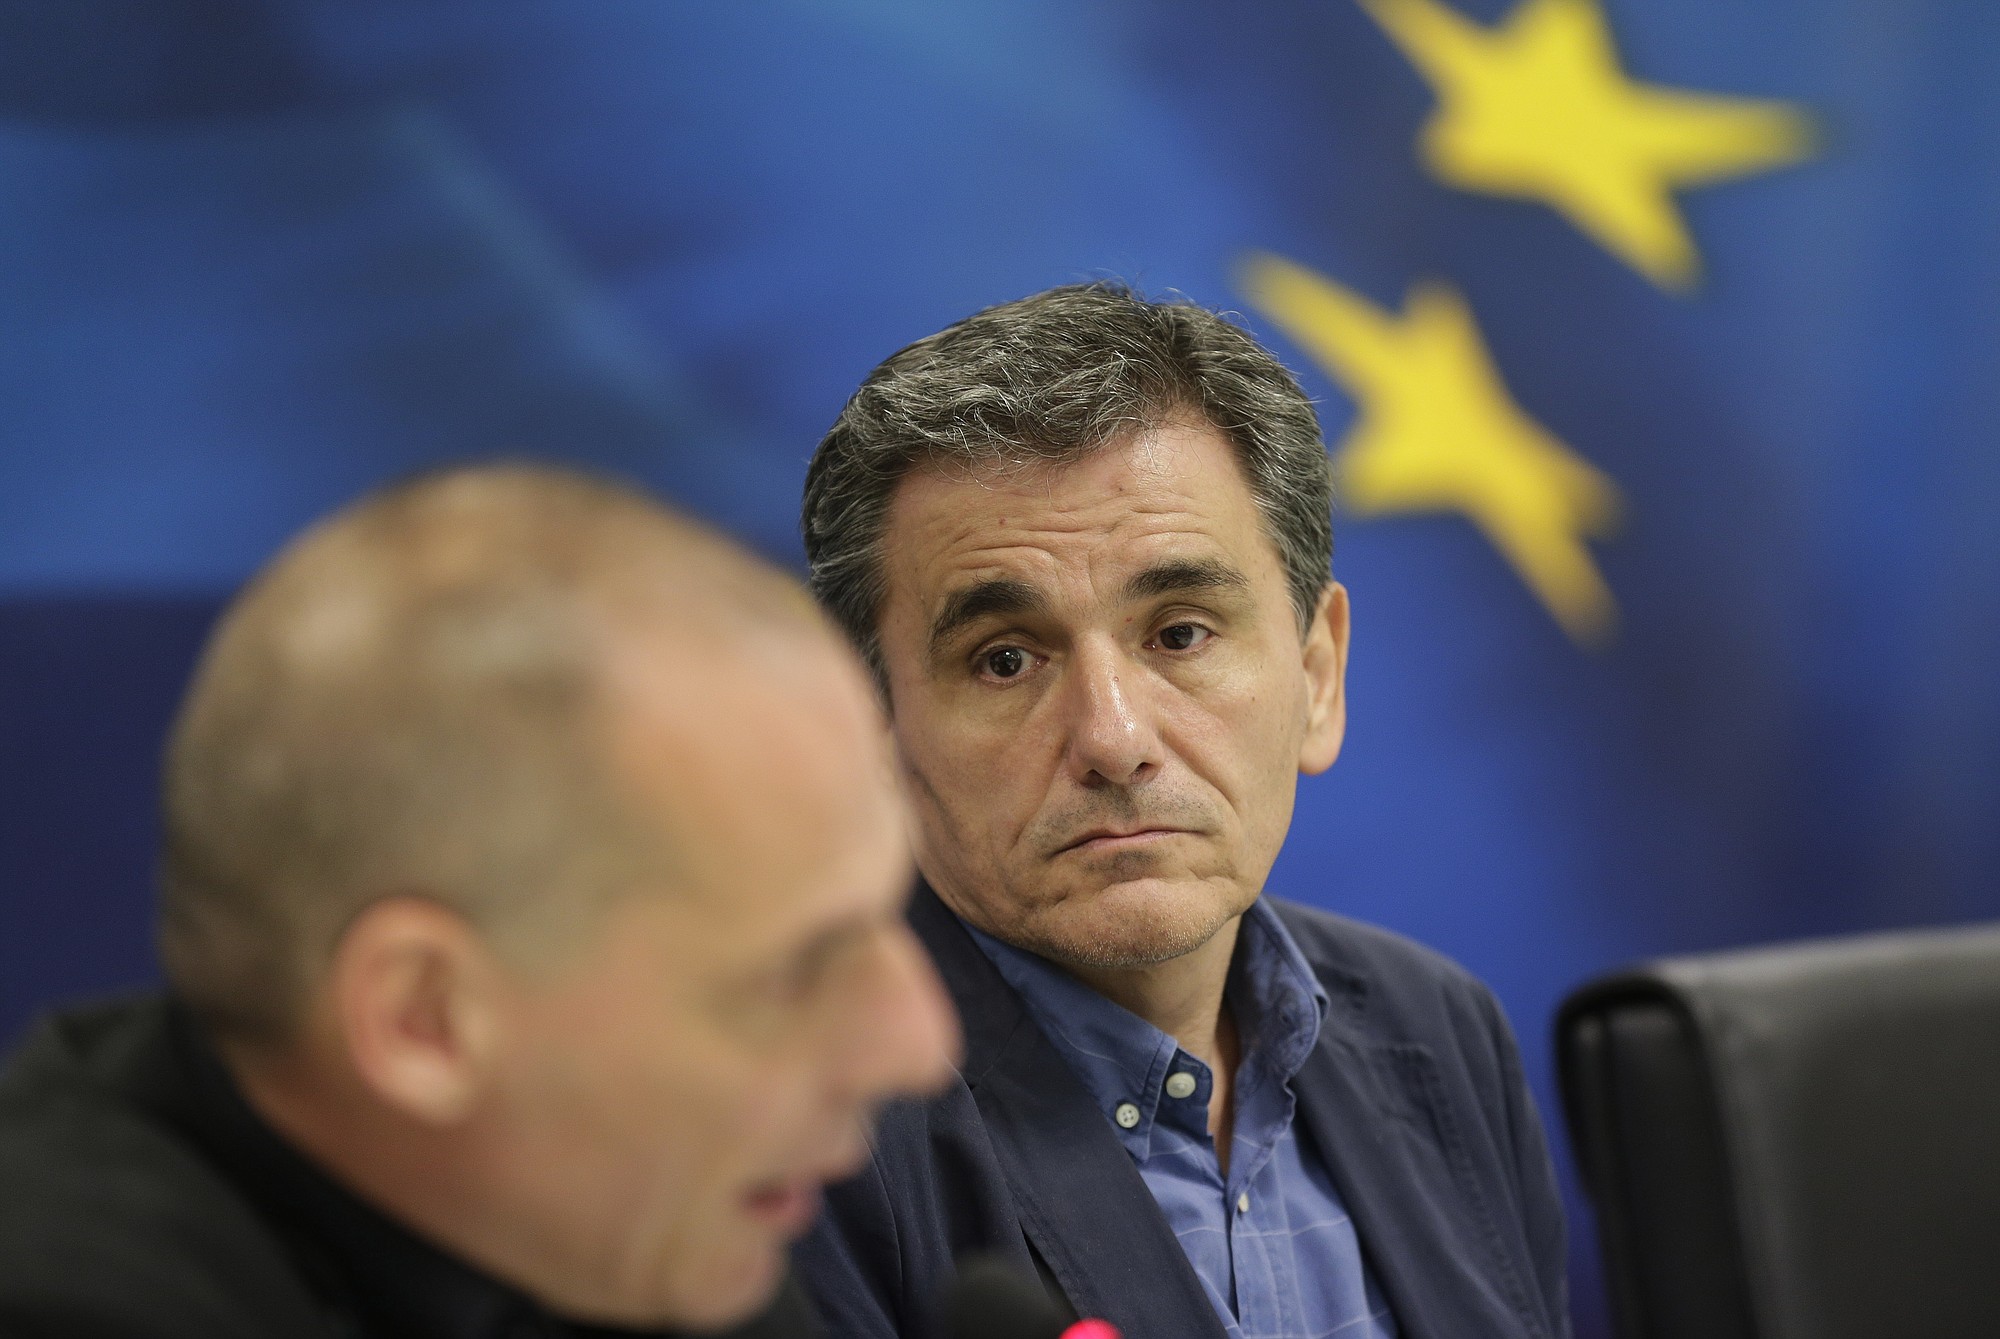 New Greek Finance Minister Euclid Tsakalotos, right, listens to outgoing Finance Minister Yanis Varoufakis as he speaks Monday during a ceremony in Athens.